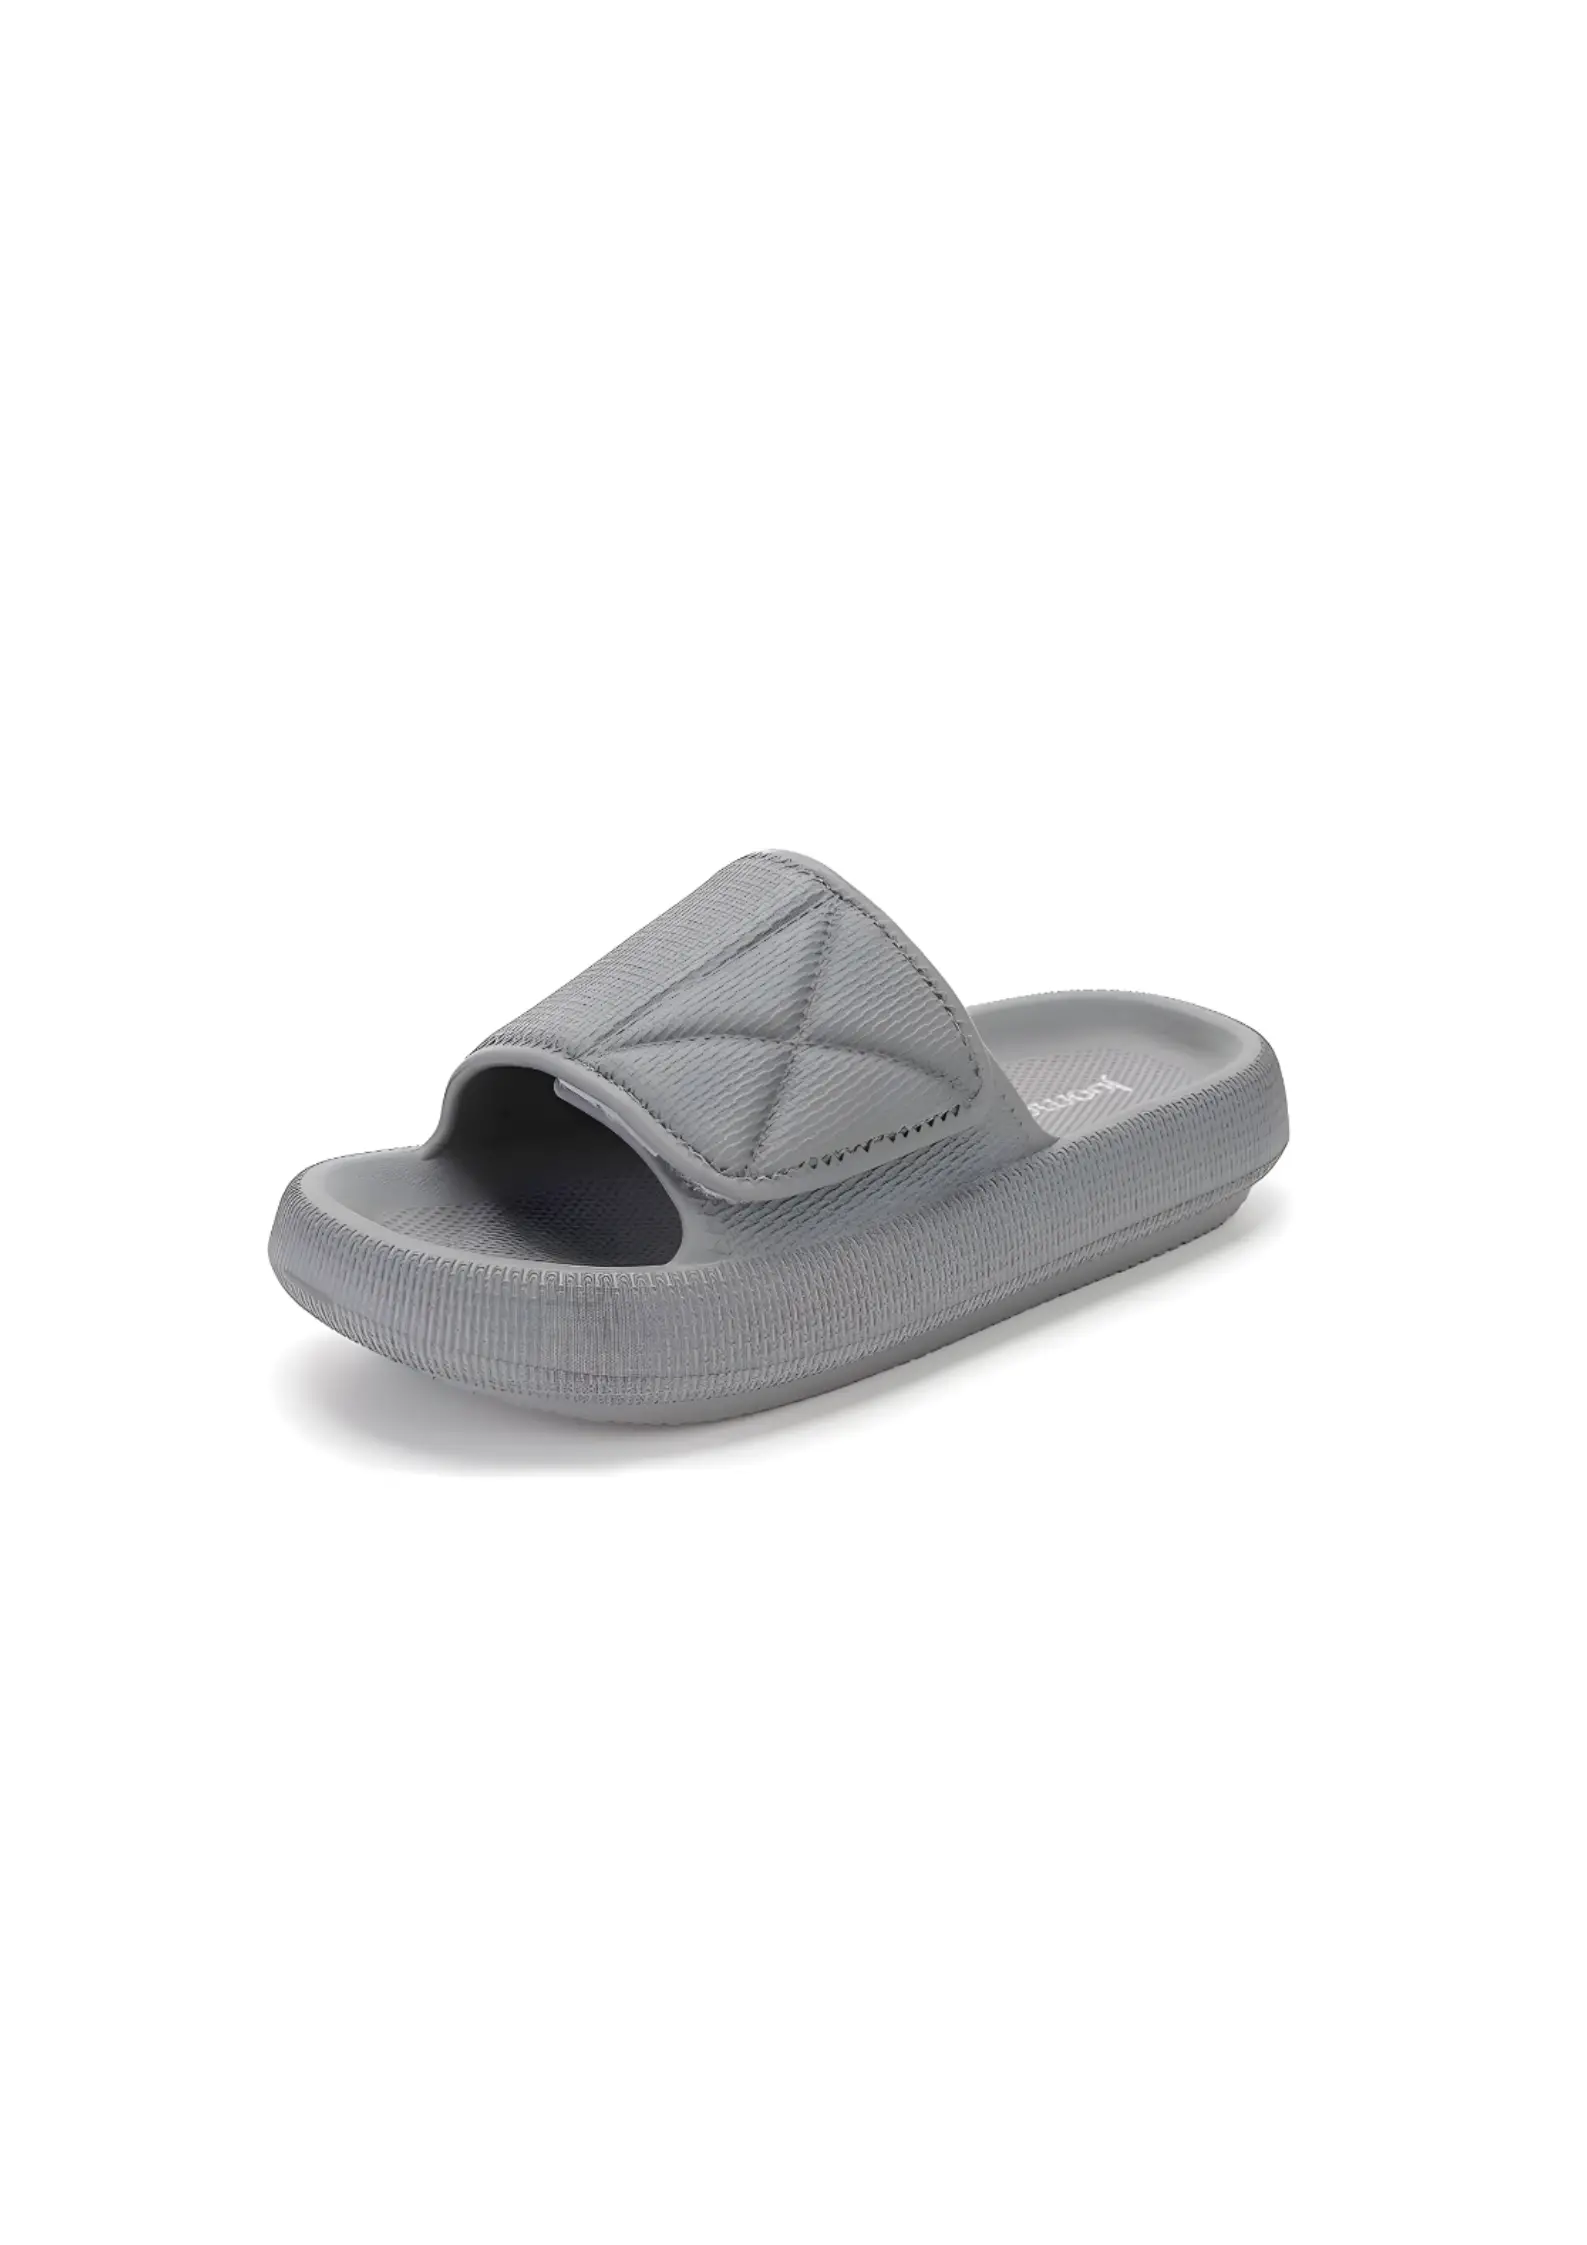 Joomra Athletic Sandals for Women and Men with Recovery Support Pillow